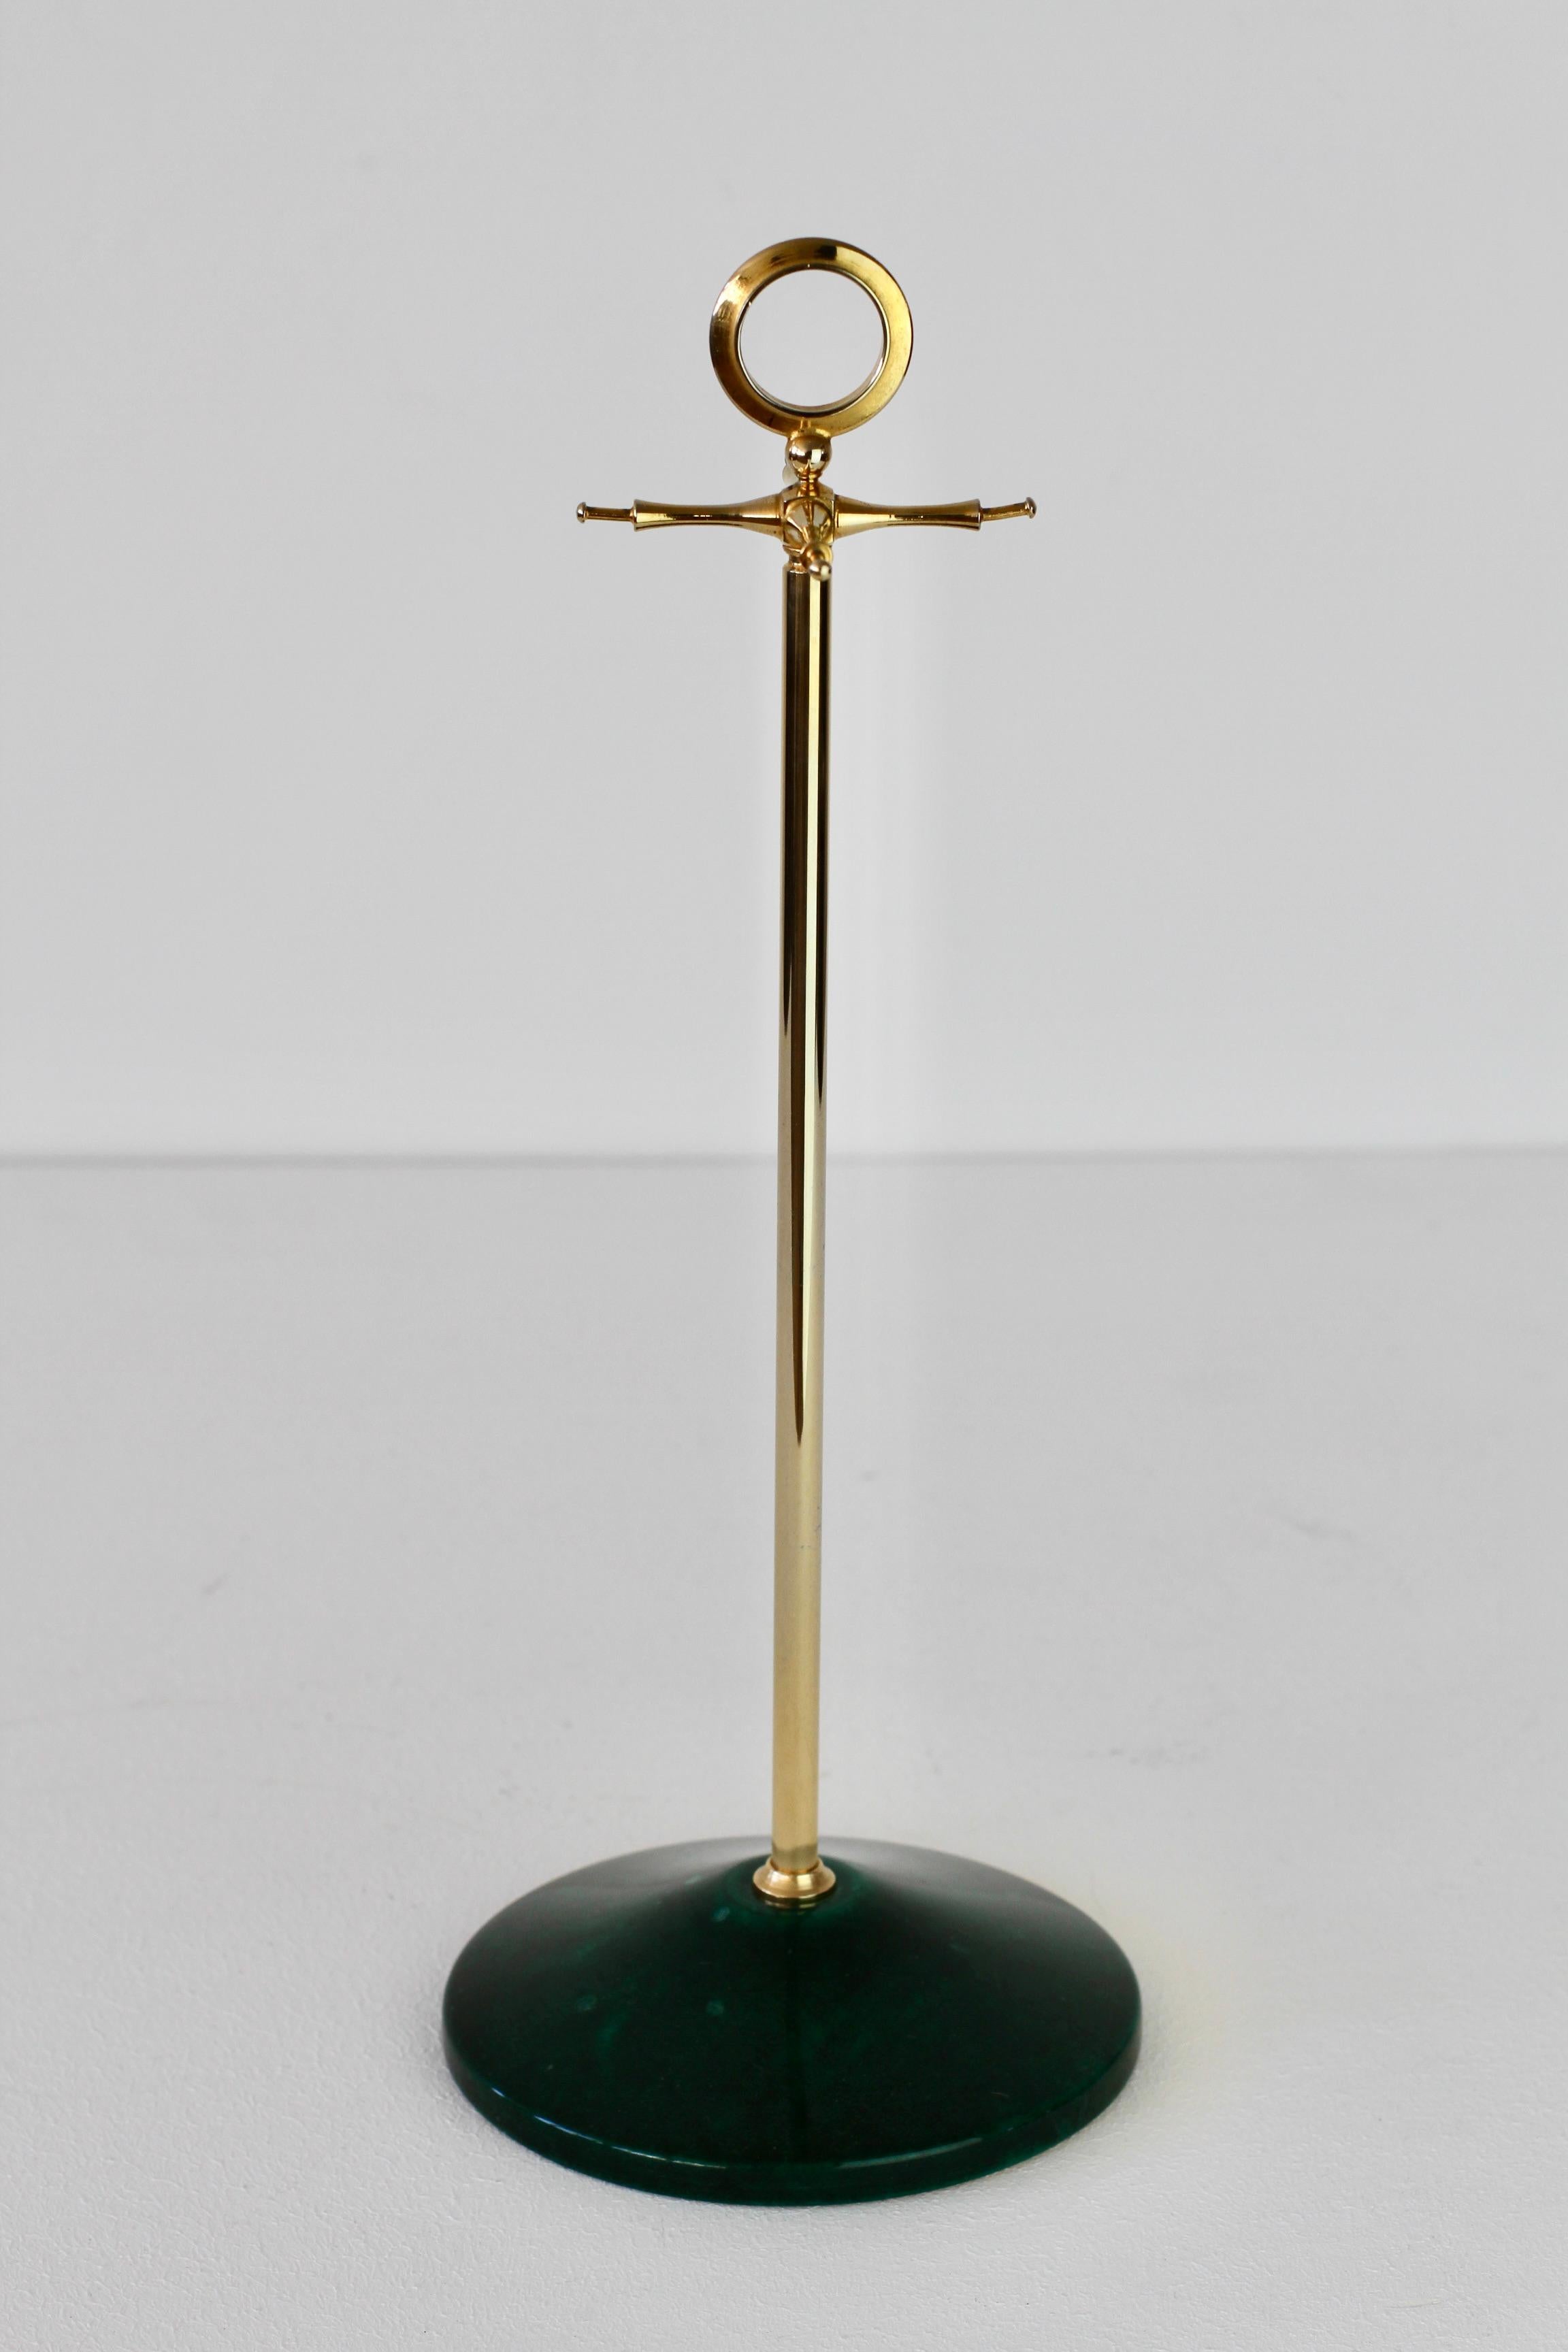 Midcentury Italian 1960s bar cocktail mixer set holder or stand by Aldo Tura, Milan. The rare and signed with original label green colored and lacquered goatskin leather combined with gilded cast metal tool holder is perfect for any midcentury or